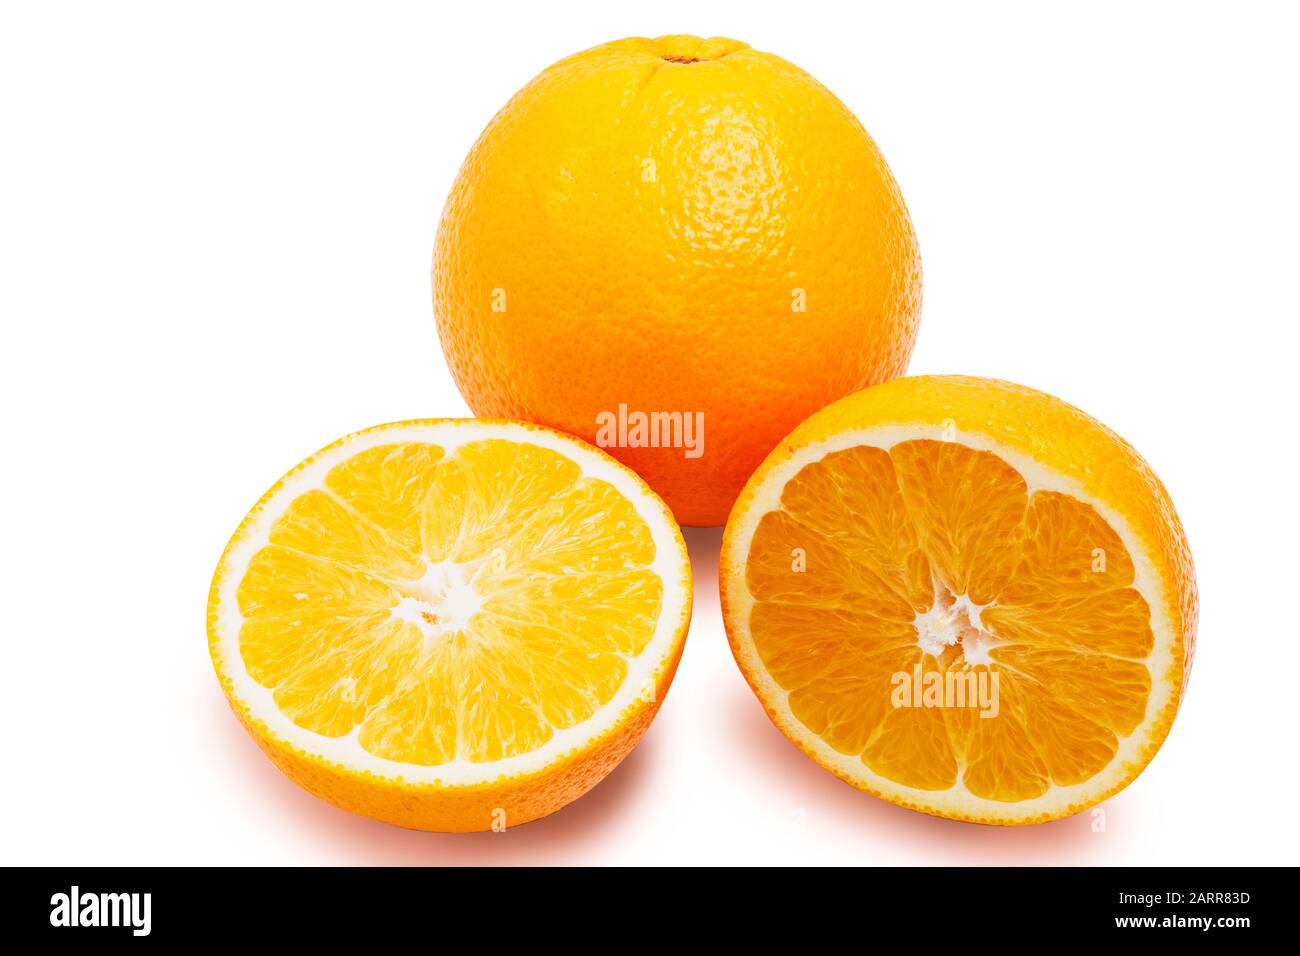 fresh oranges isolated on a white background with shadow Stock Photo